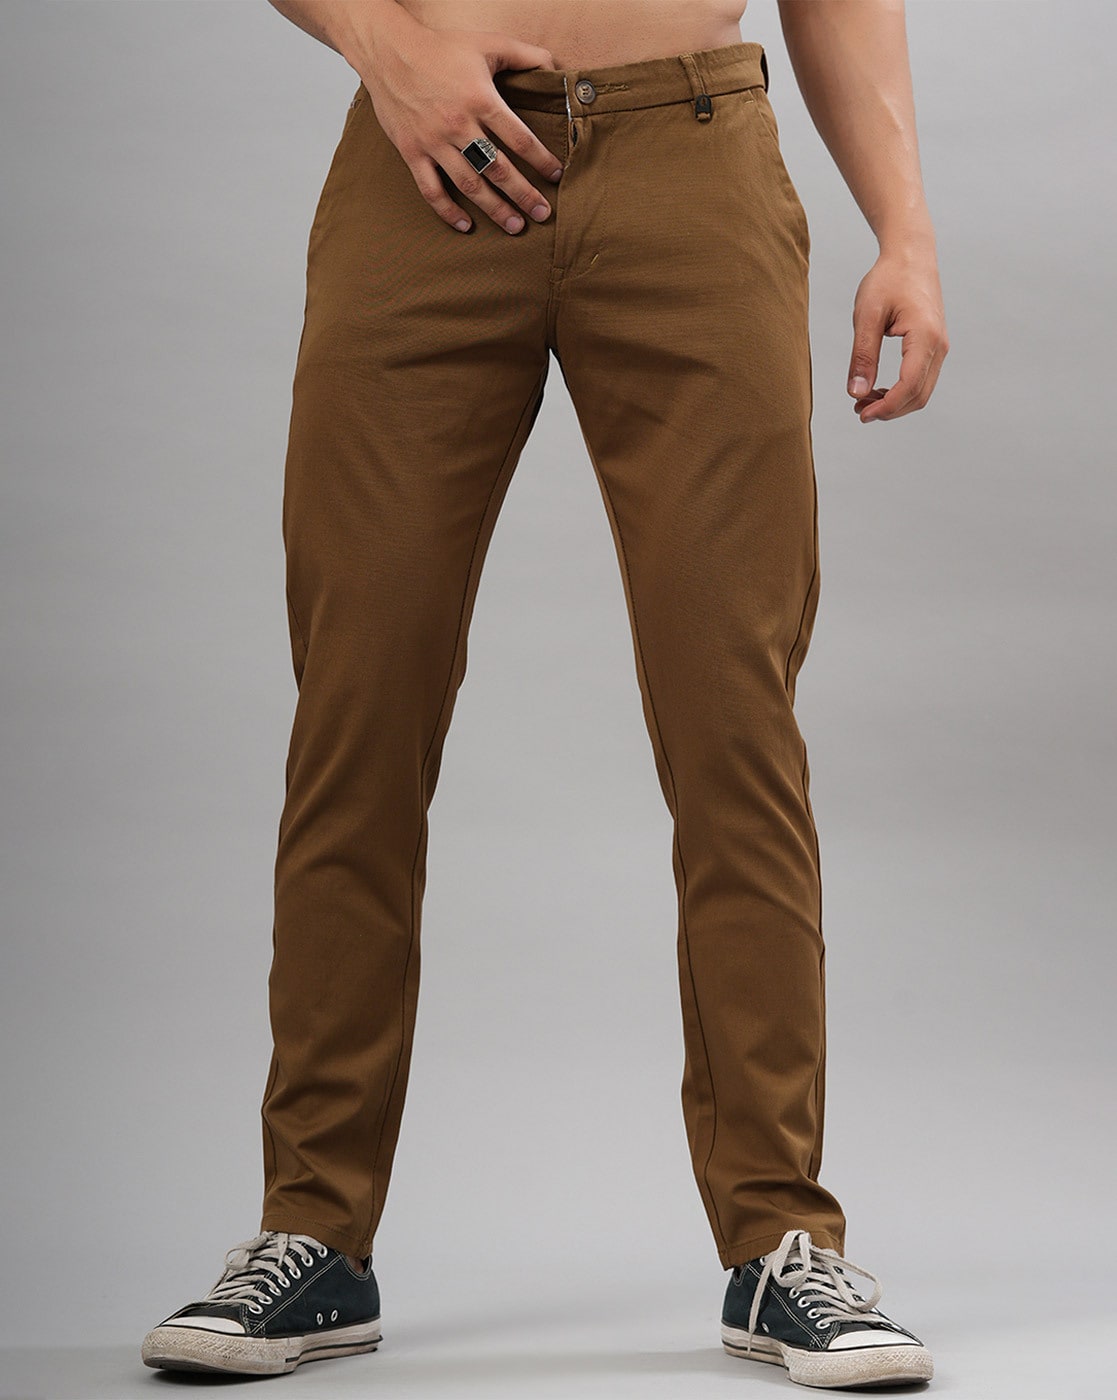 MENS COFFEE BROWN SOLID JASON FIT TROUSER  JDC Store Online Shopping